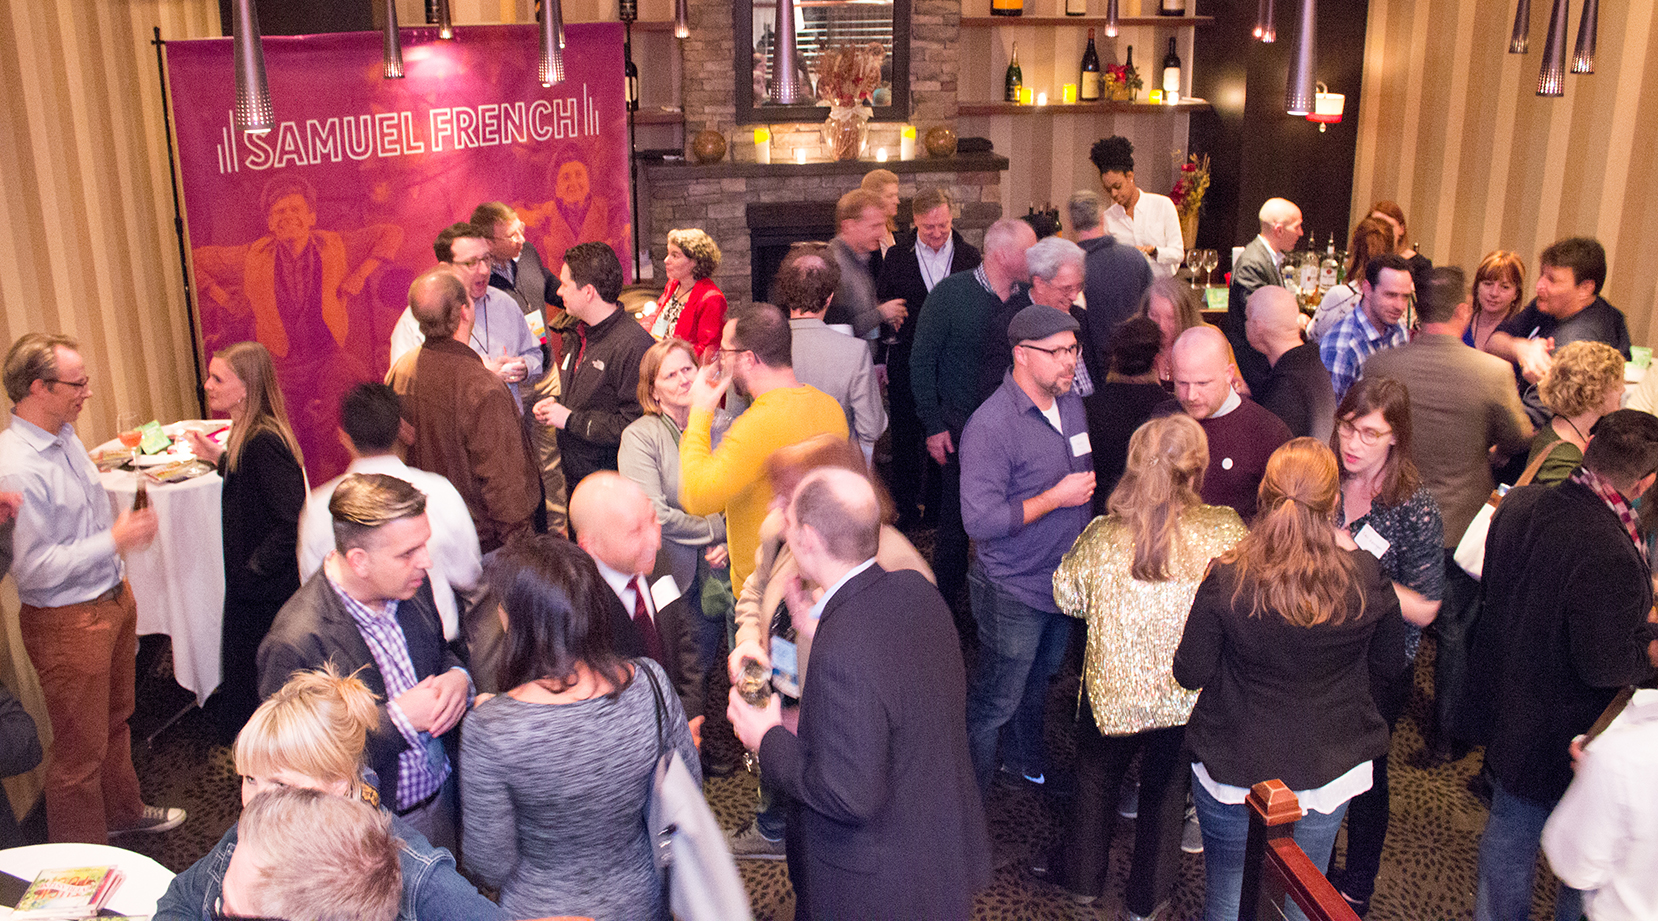 Members and guests network and enjoy the open bar at Glass House Tavern